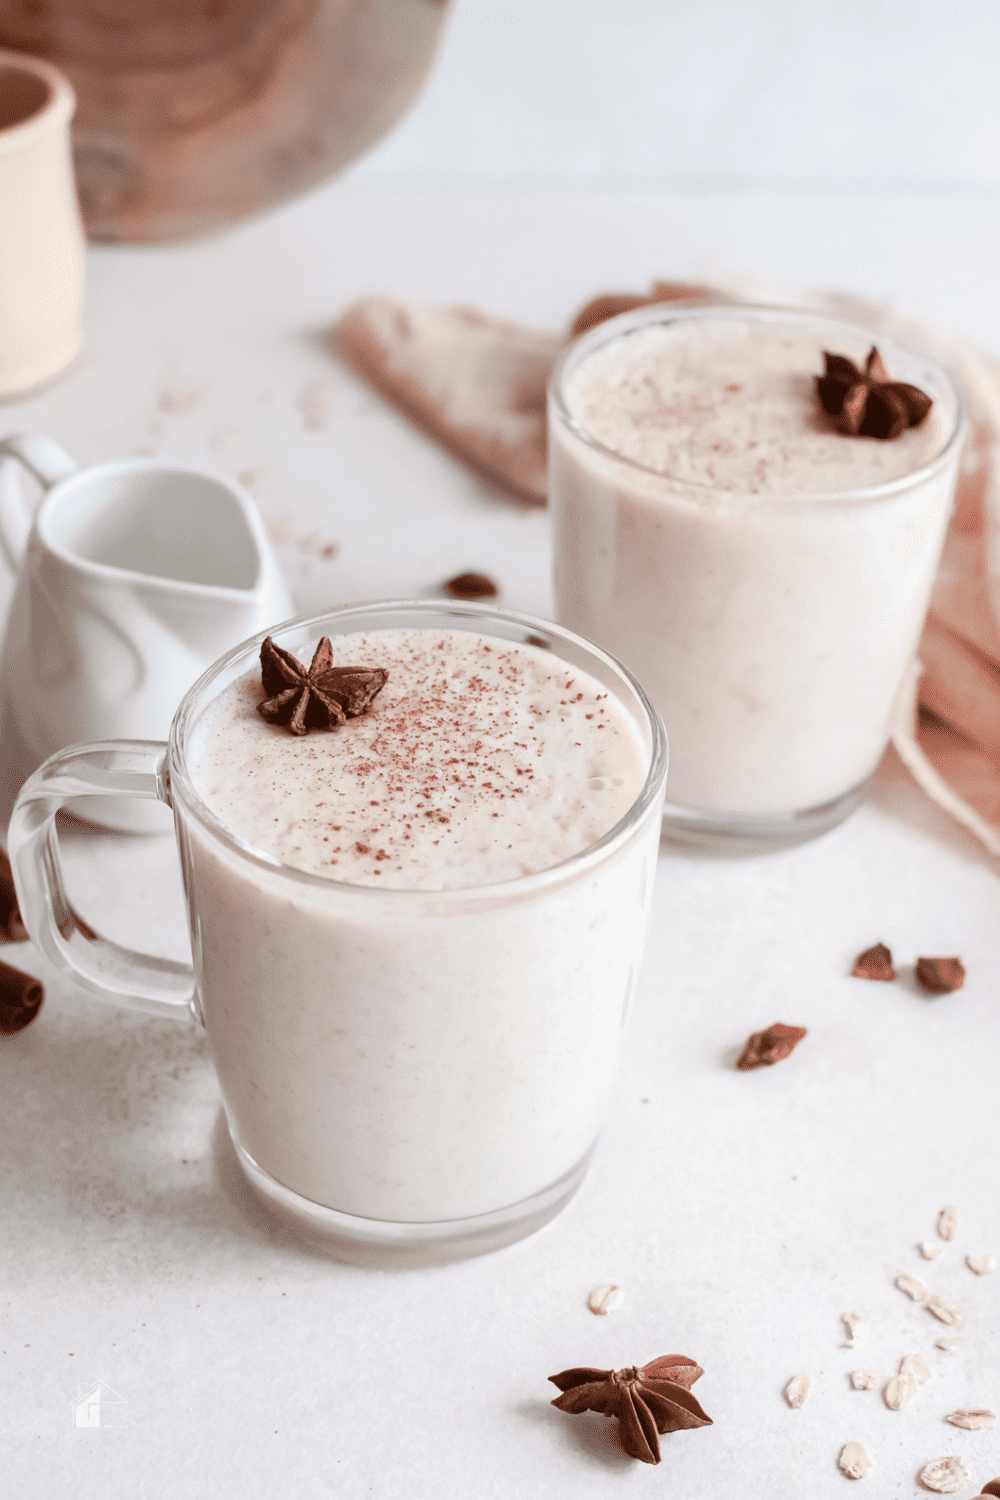 Atole de Avena is a comforting hot oatmeal drink recipe made with oats, milk, water, sugar, and cinnamon. via @mystayathome